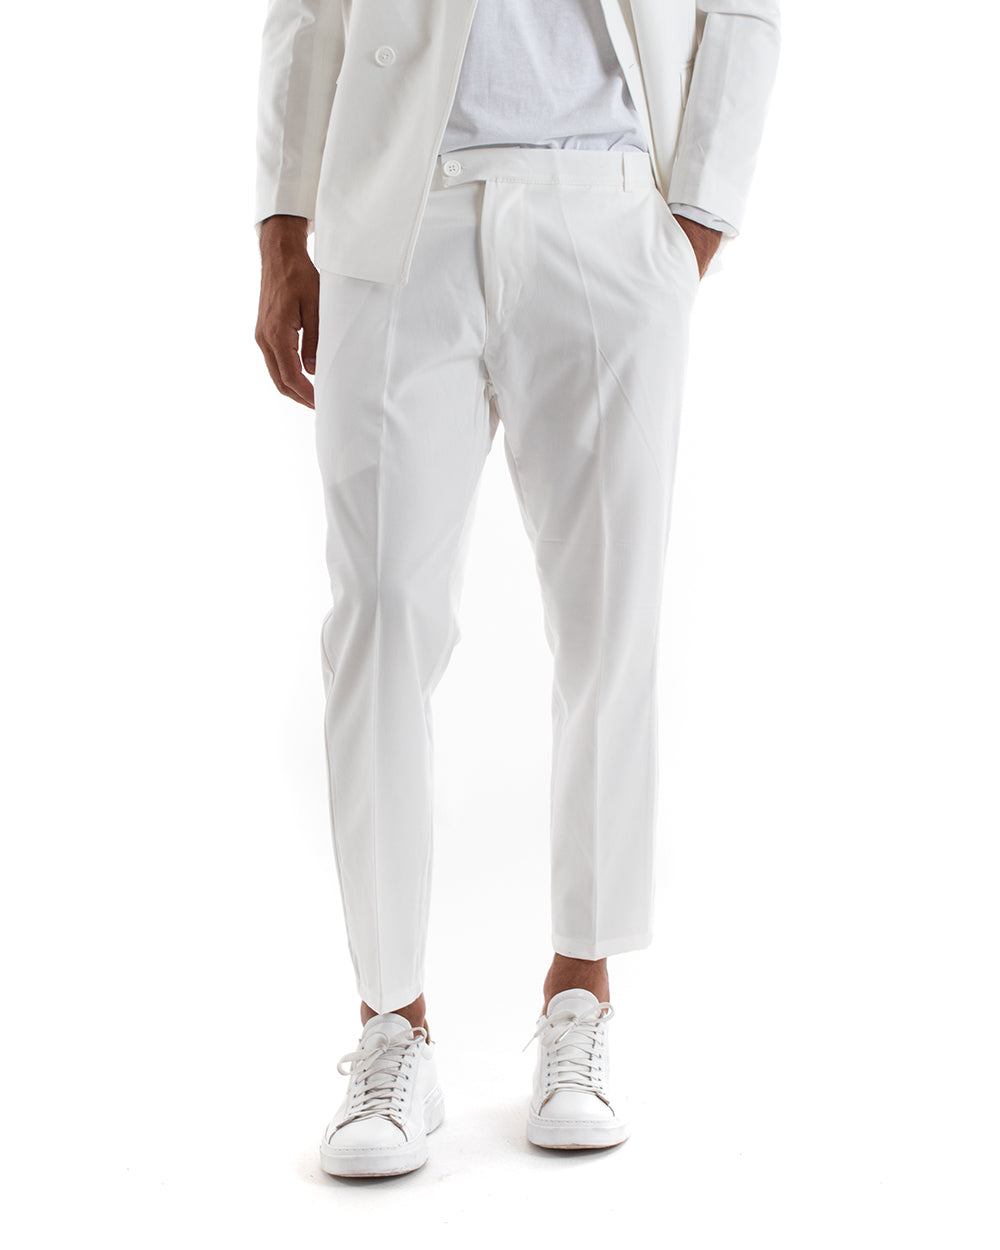 Double-breasted Men's Suit Viscose Suit Jacket Pants White Sporty Elegant Ceremony GIOSAL-OU2175A